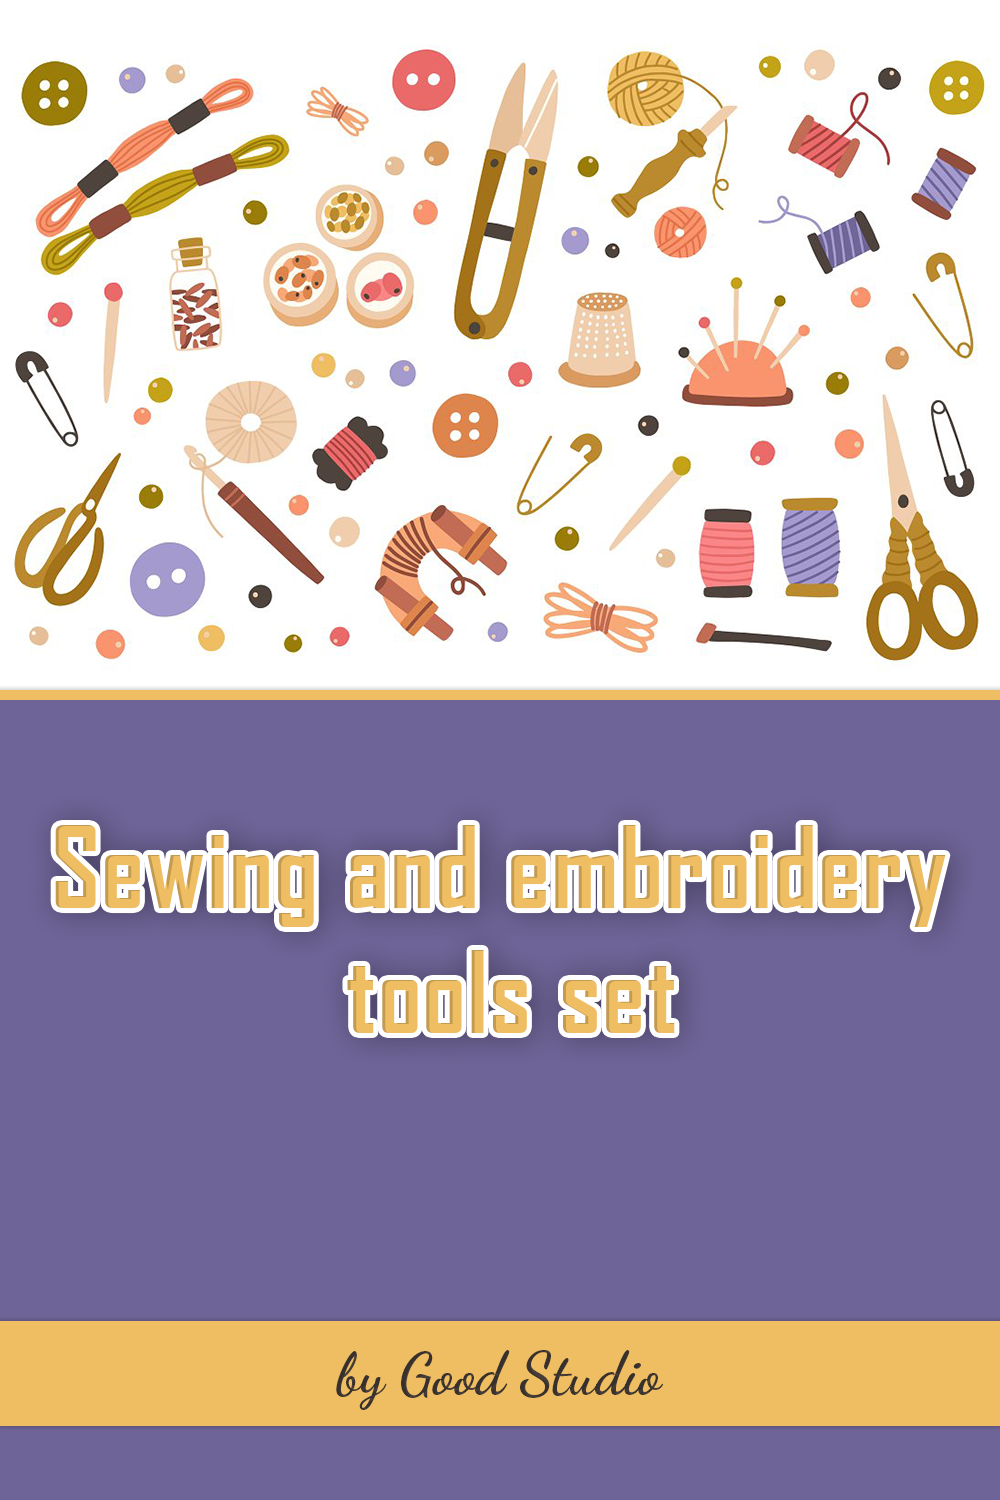 Sewing and embroidery tools set of pinterest.